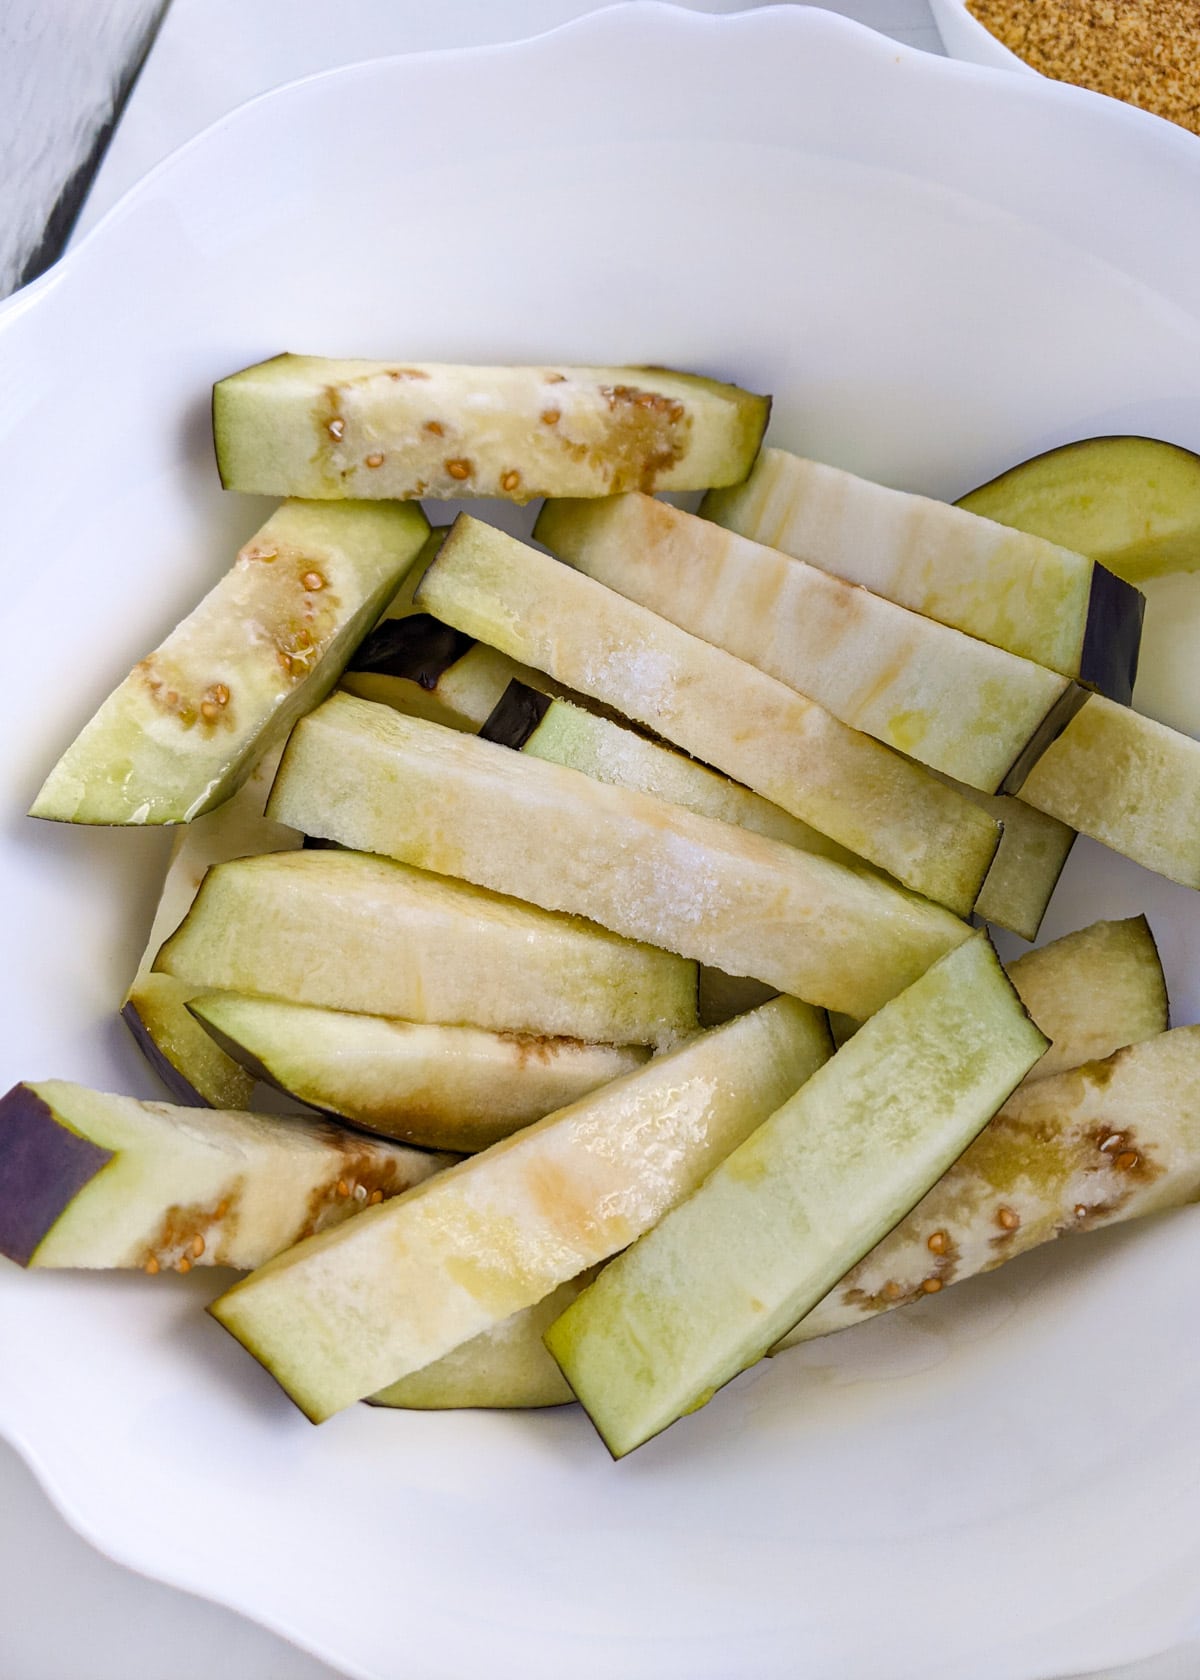 Eggplant slices with salt and oil.